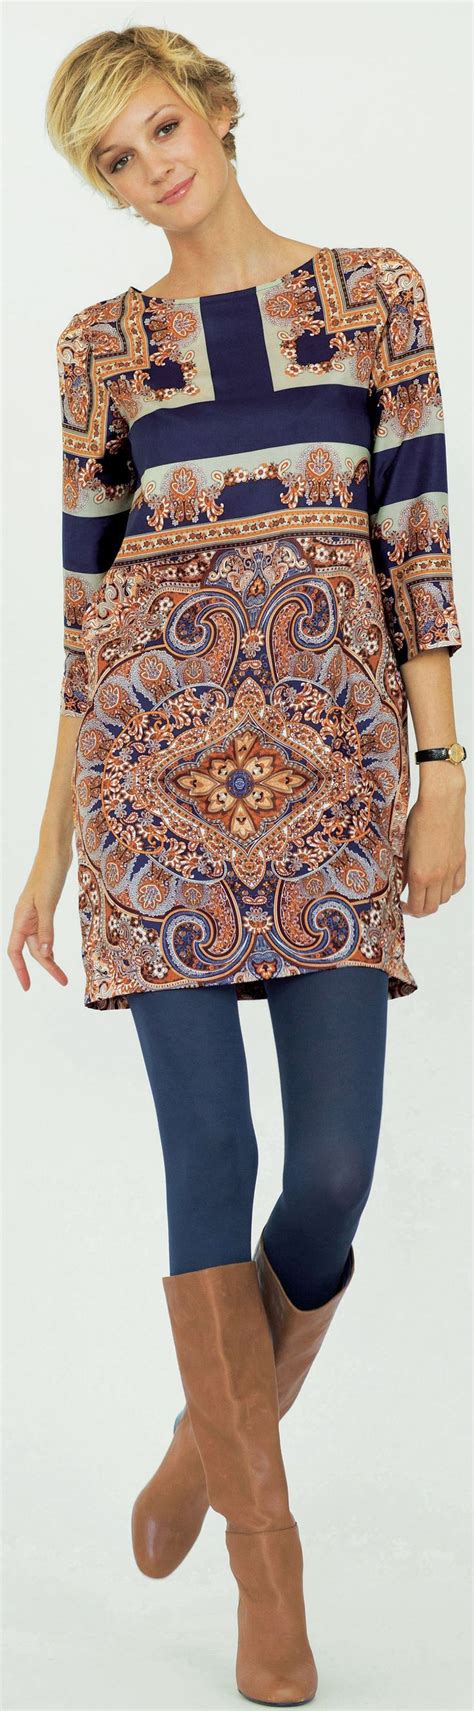 Tunic Tops For Women Over 60 40 Women’s Tunic Tops Free Delivery Over £50 Debenhams